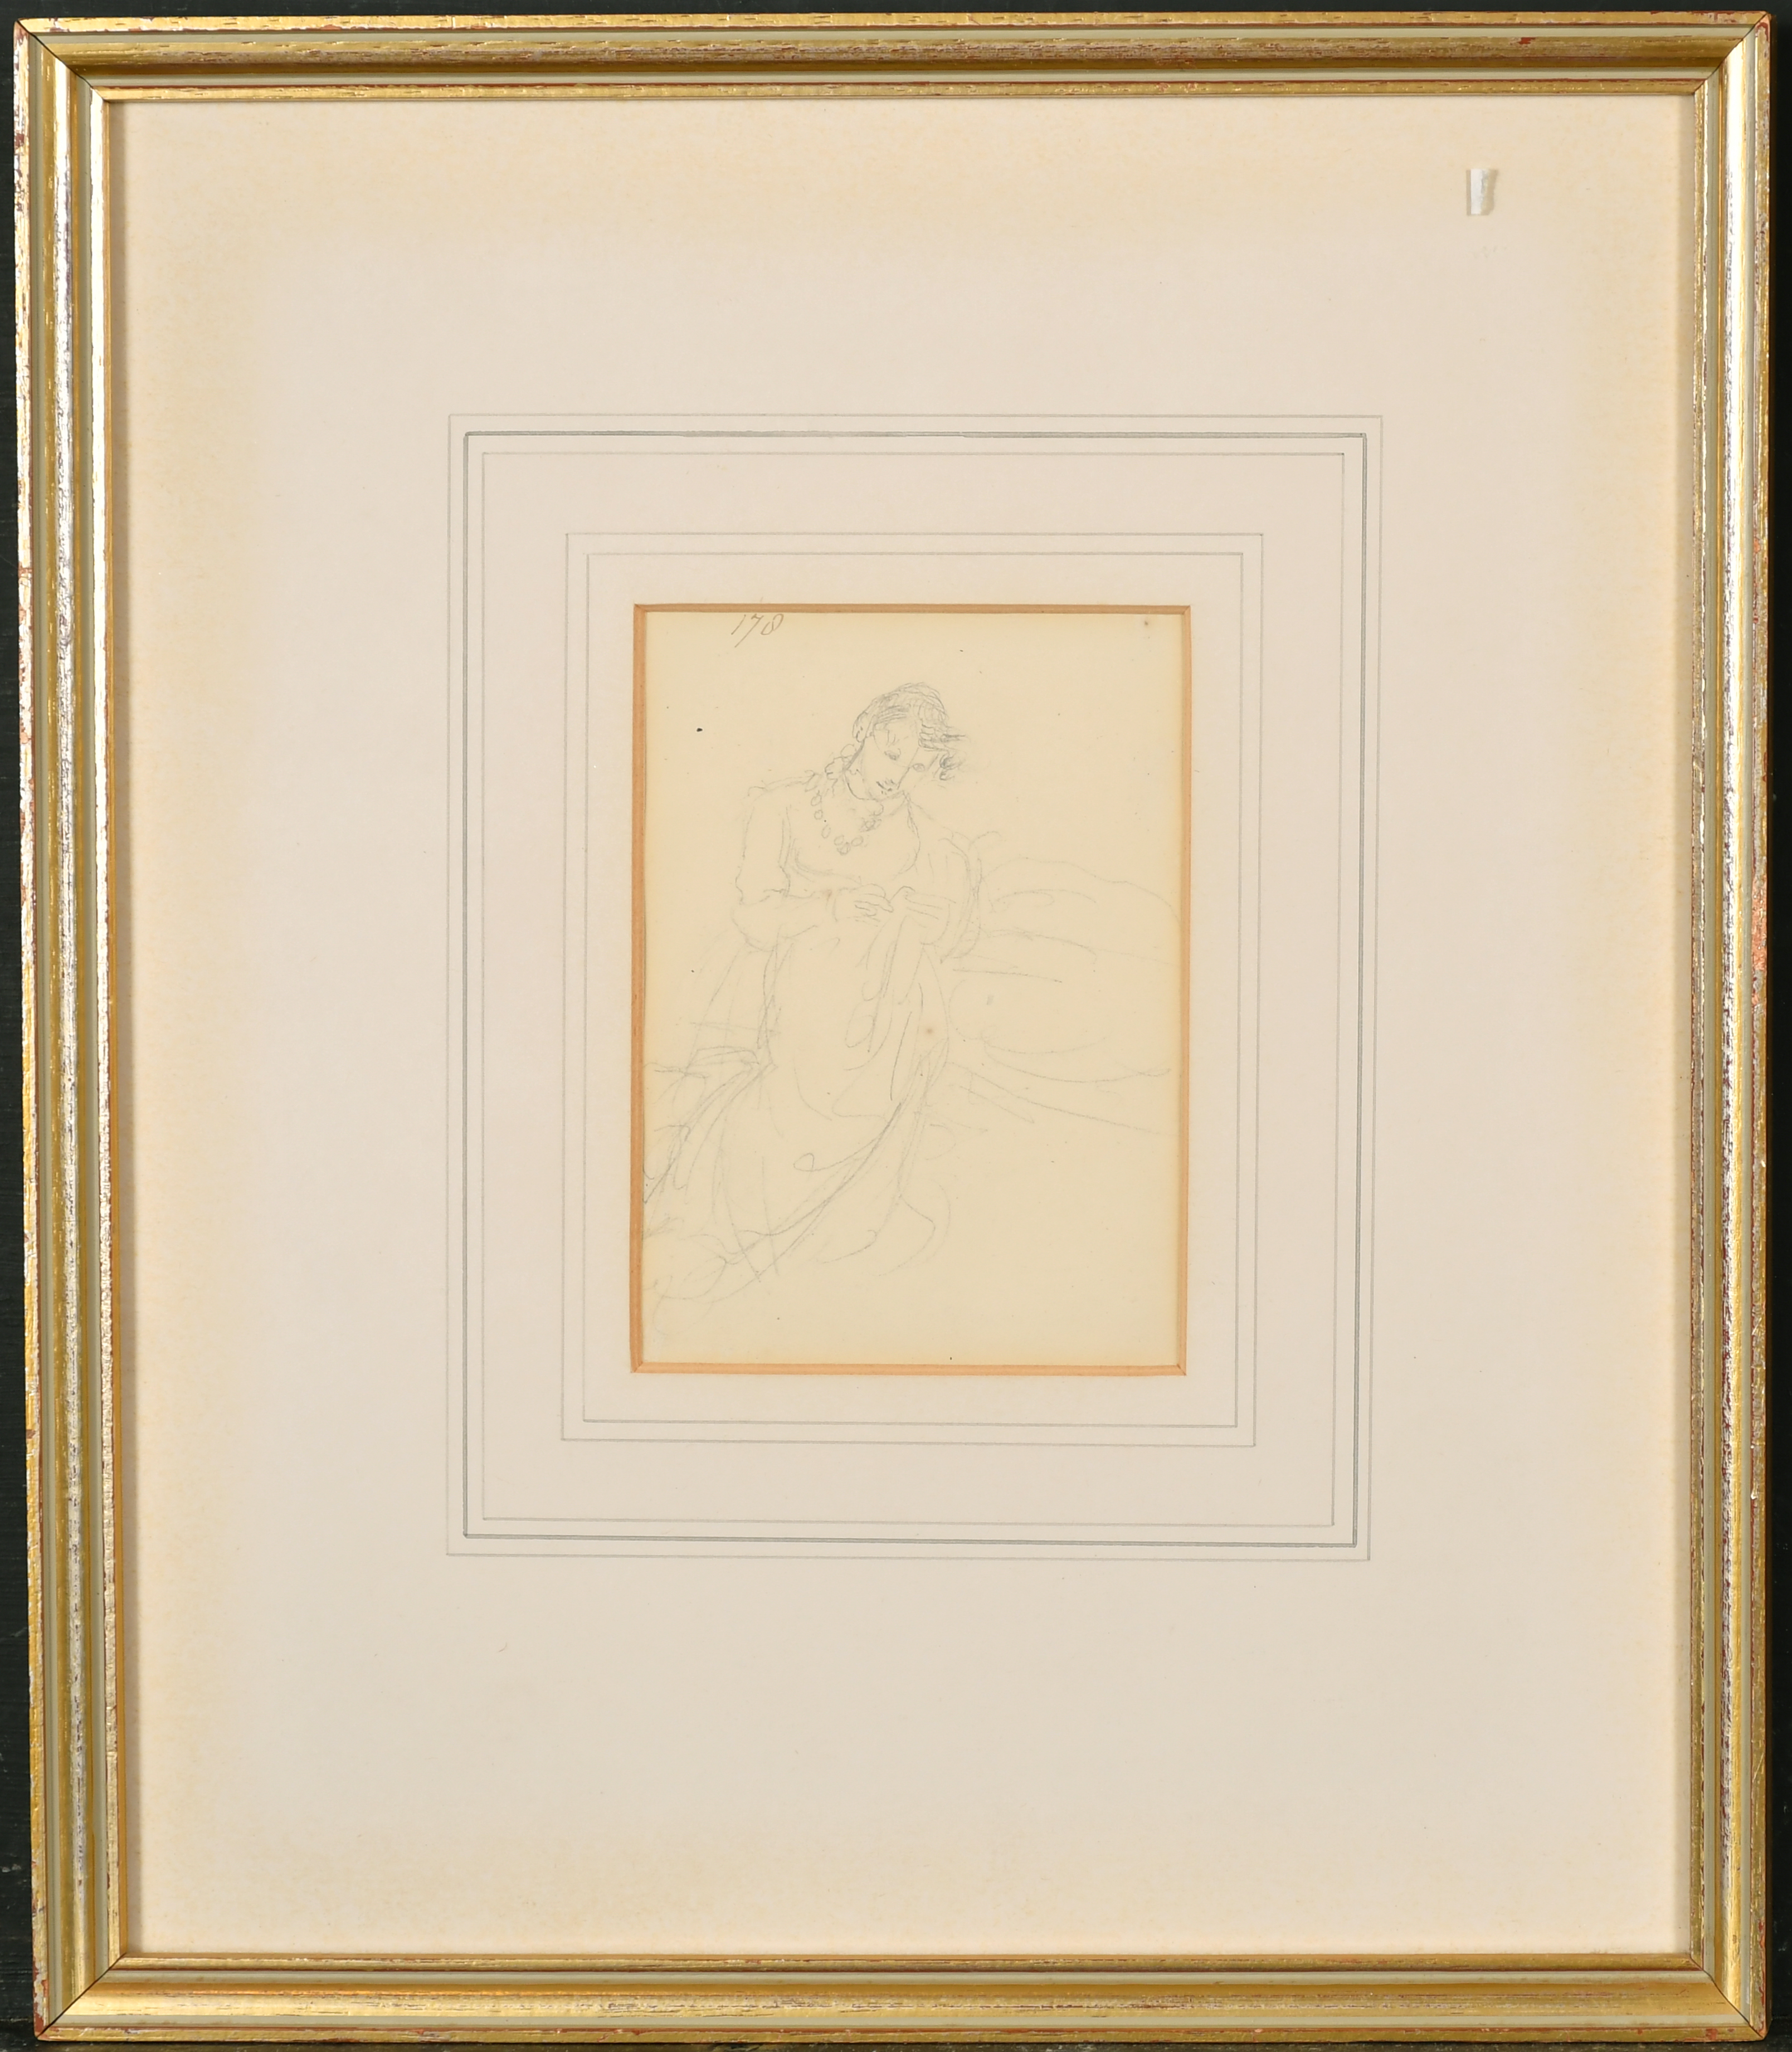 John Nixon (1750-1818) British. A Full Length Portrait of a Lady, Pencil, Numbered 189, 6.5" x 4.25" - Image 5 of 7